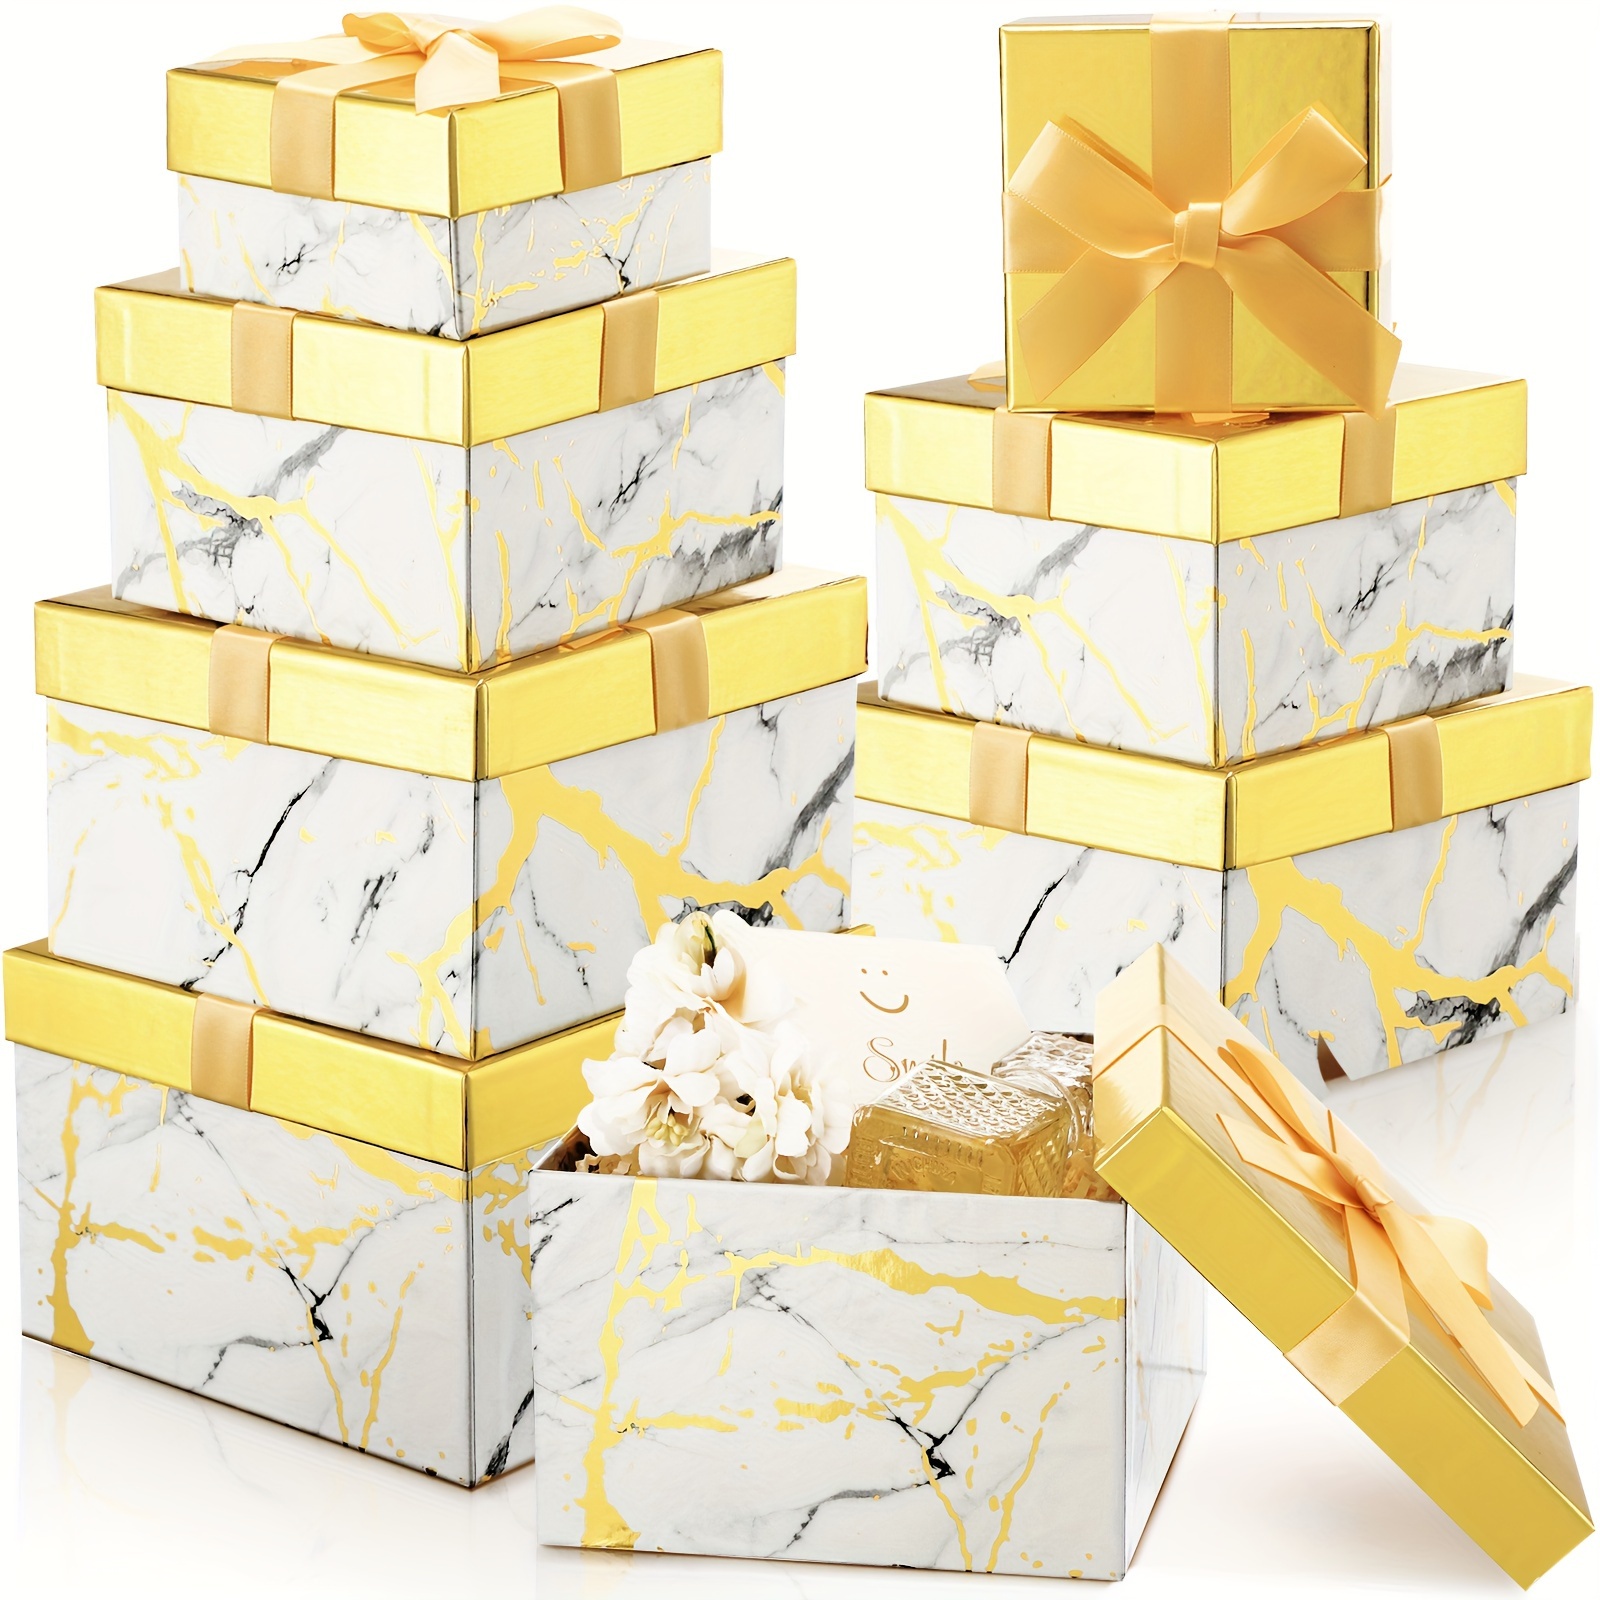 

8 Set Square Nesting Gift Boxes With Lids For Presents Marble Floral Boxes Arrangements Flowers Boxes 4 Assorted Sizes With Bow For Wedding Nurse Gift Bridal Shower (gold And White, Square)